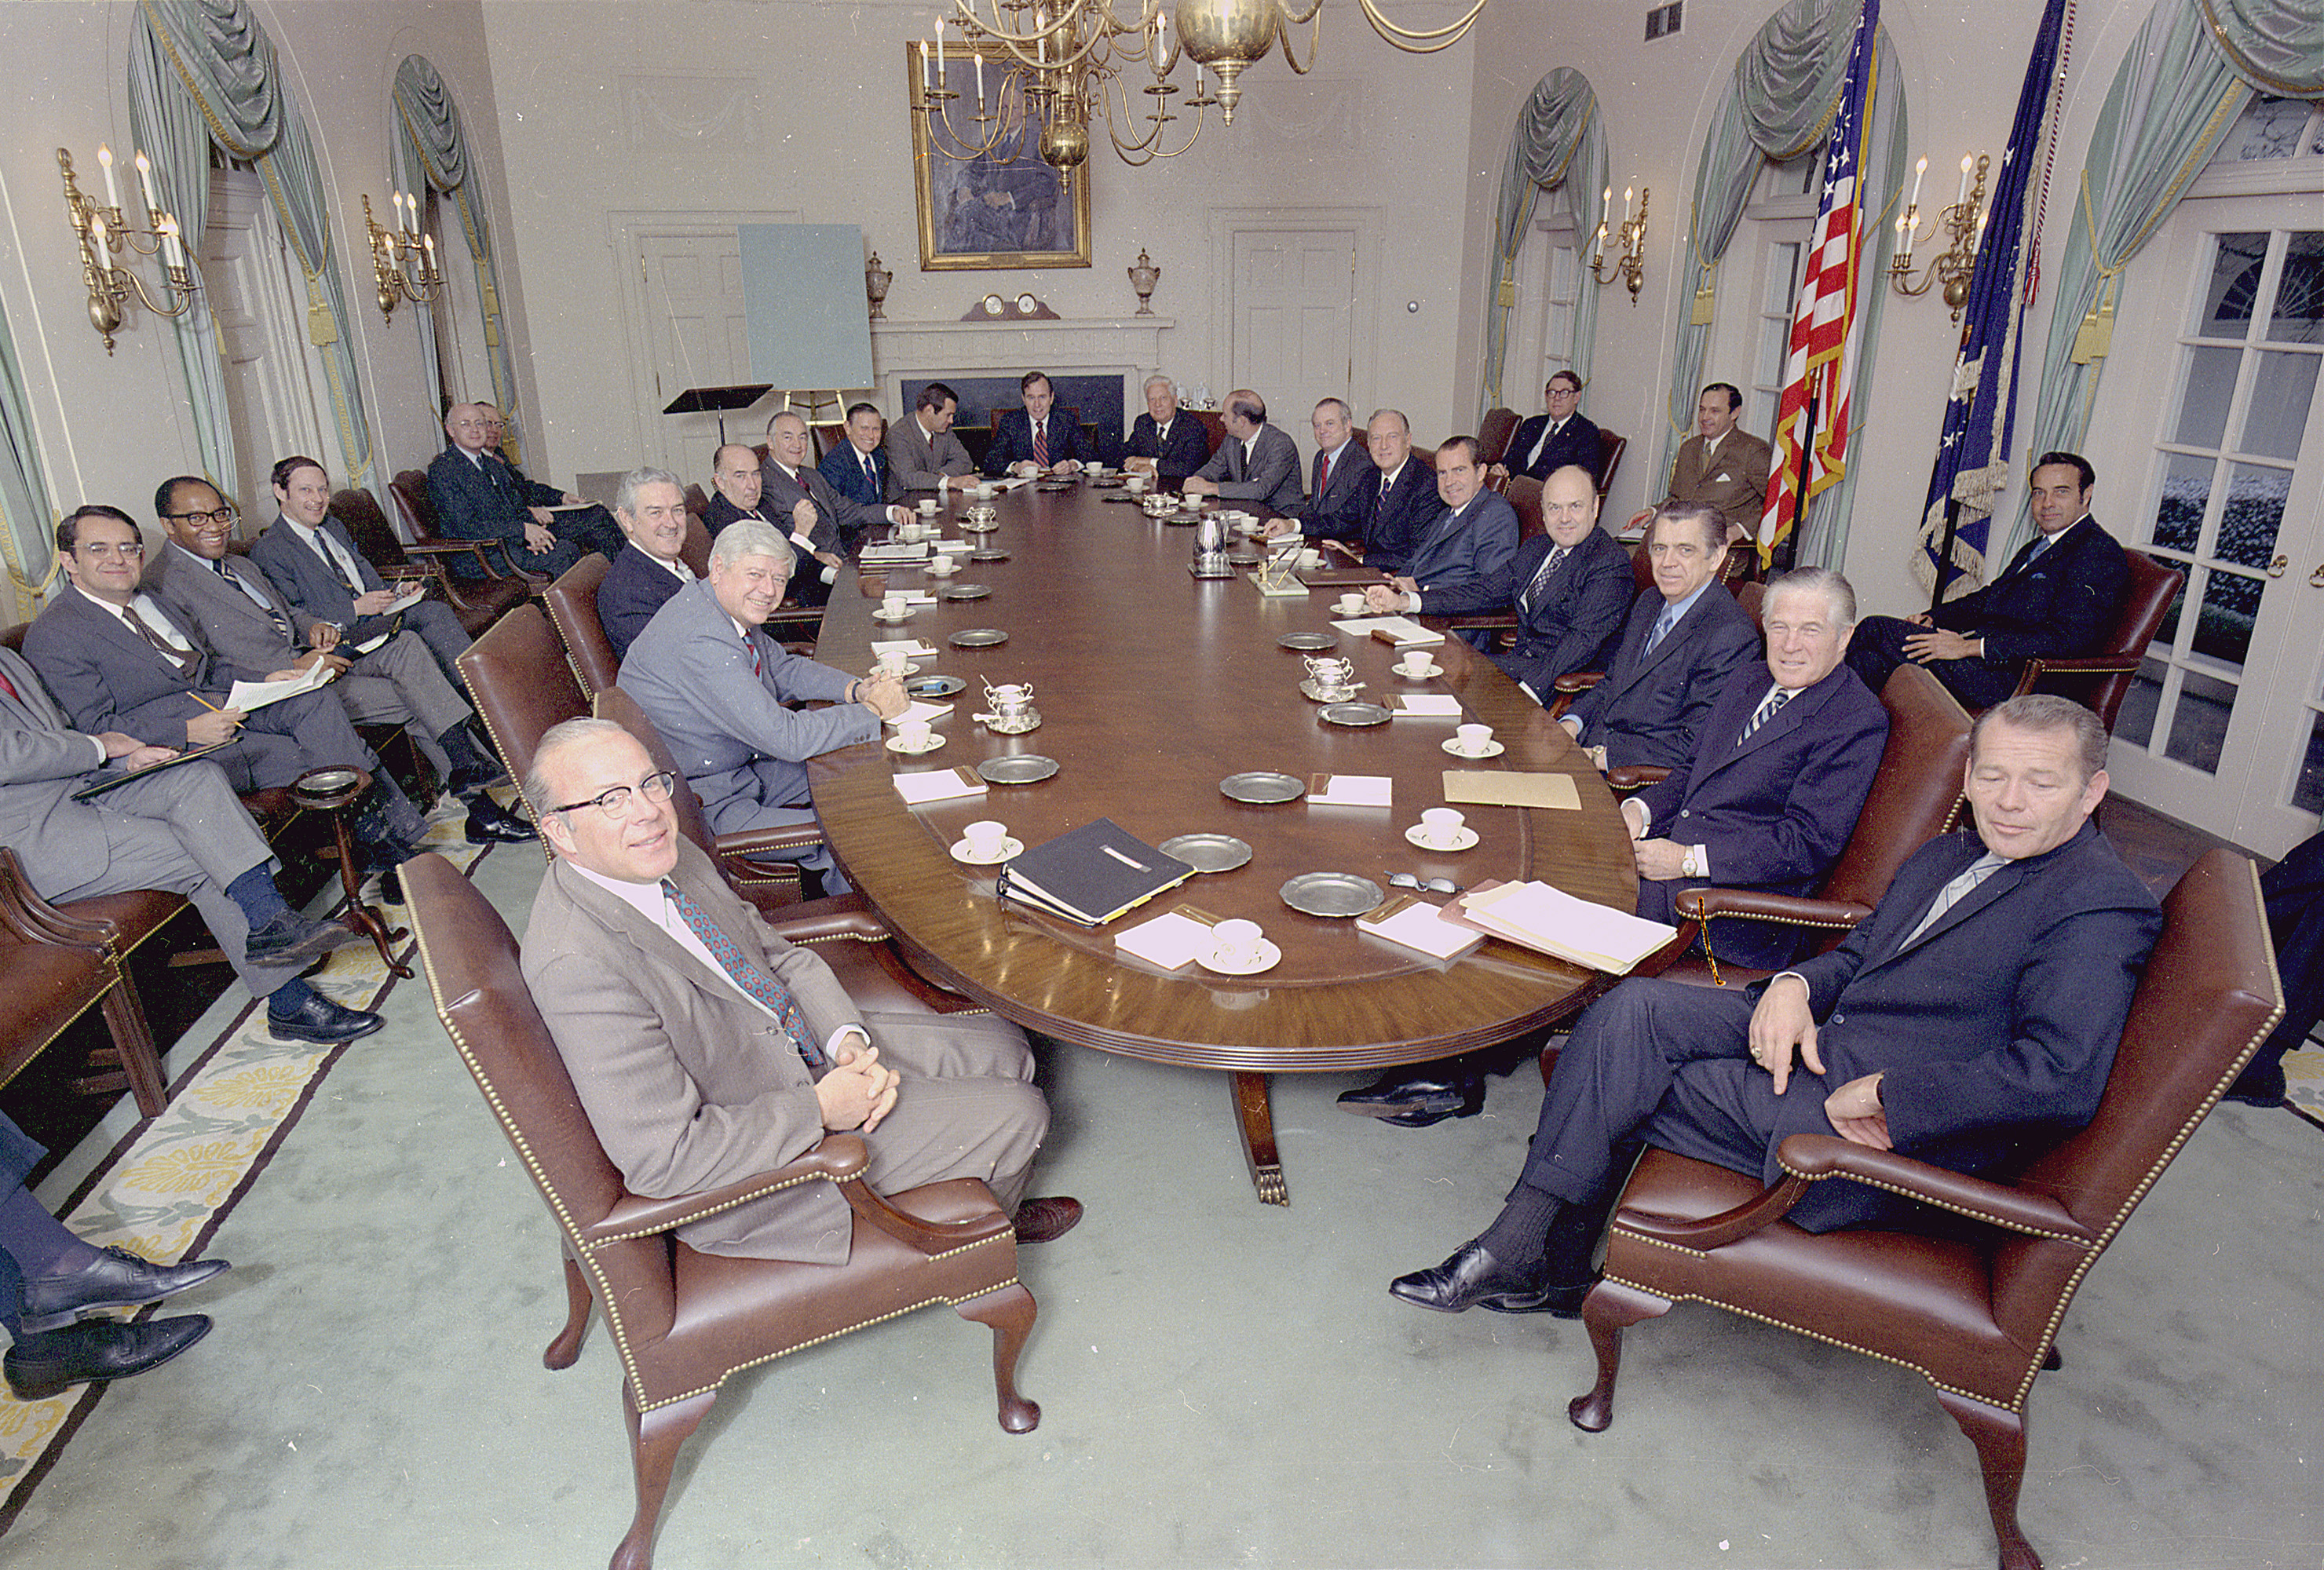 Richard M. Nixon posing with his cabinet in the cabinet room in the White House.